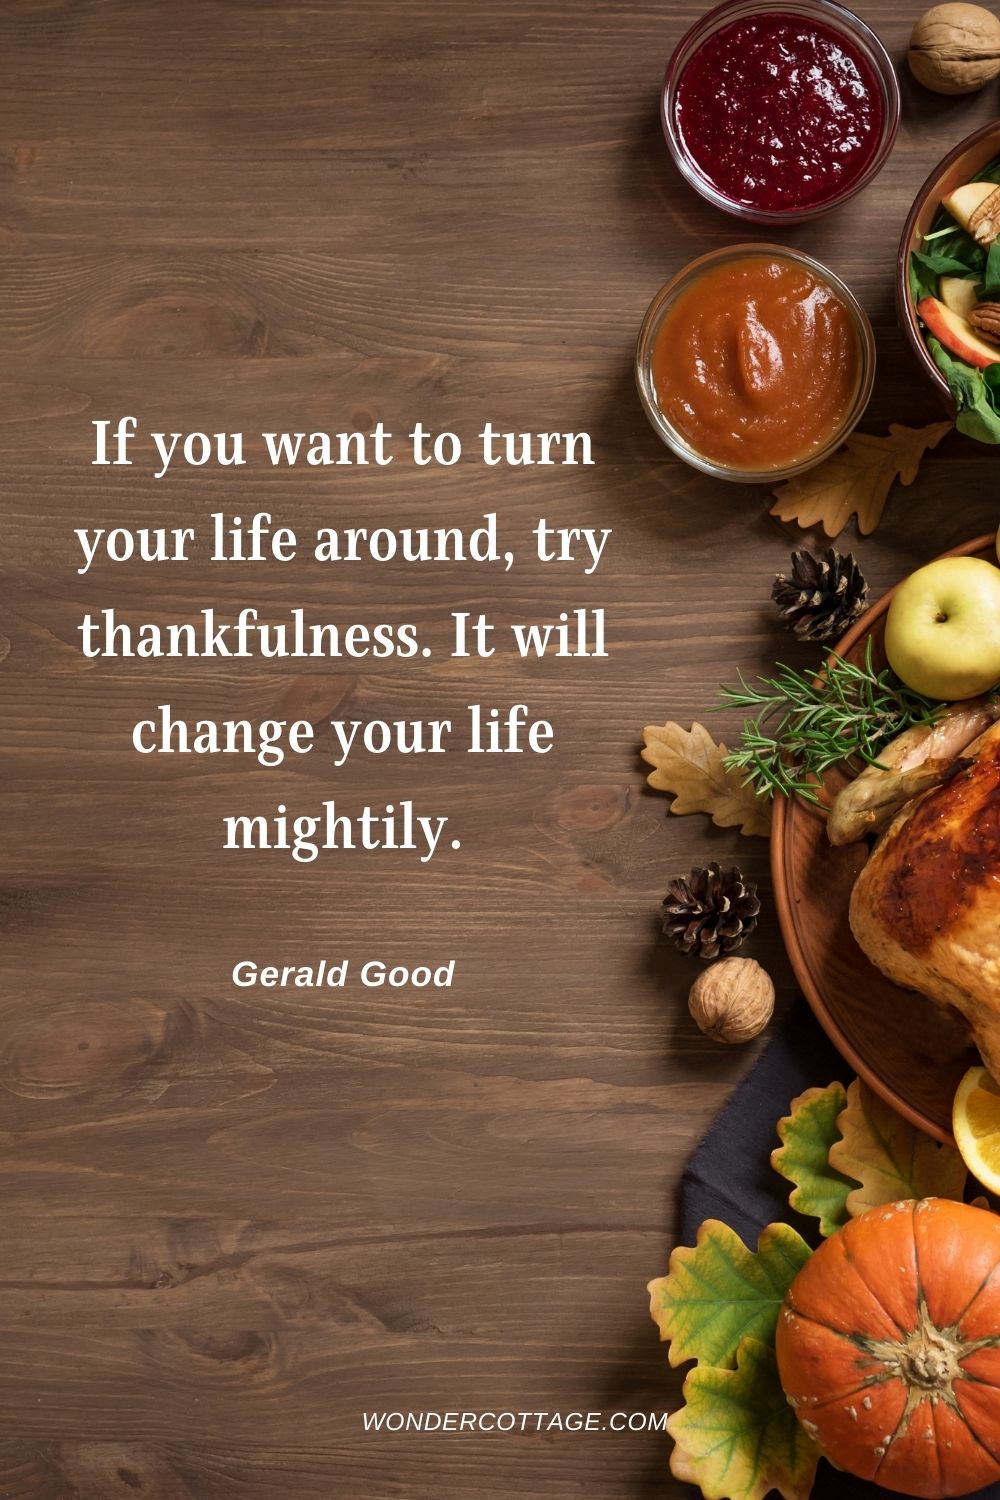 If you want to turn your life around, try thankfulness. It will change your life mightily. Gerald Good